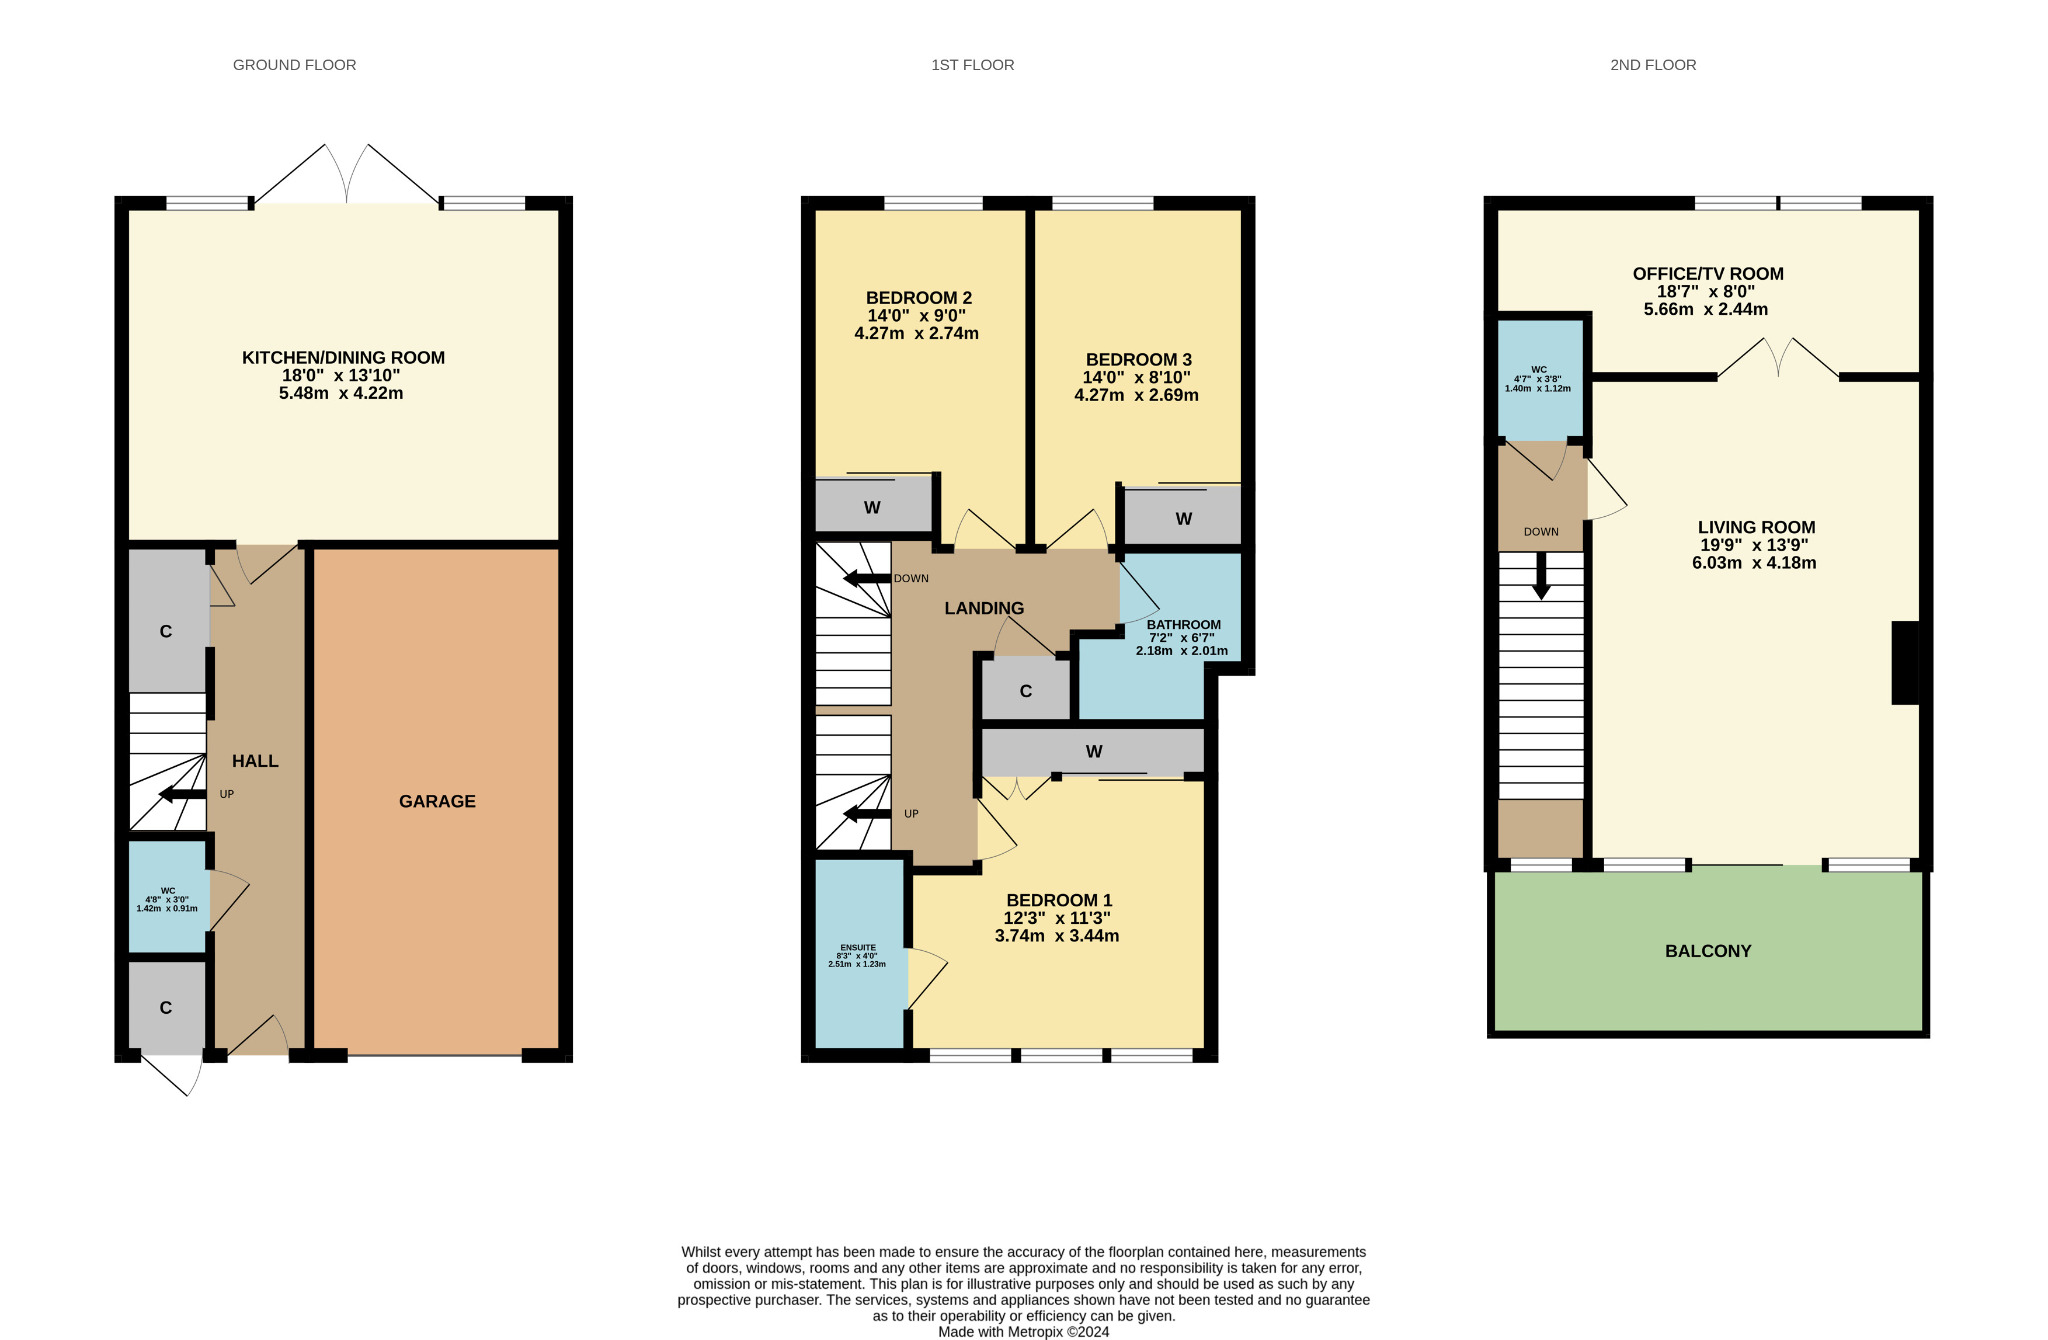 3 bed terraced house for sale in St Francis Rigg, Glasgow - Property floorplan